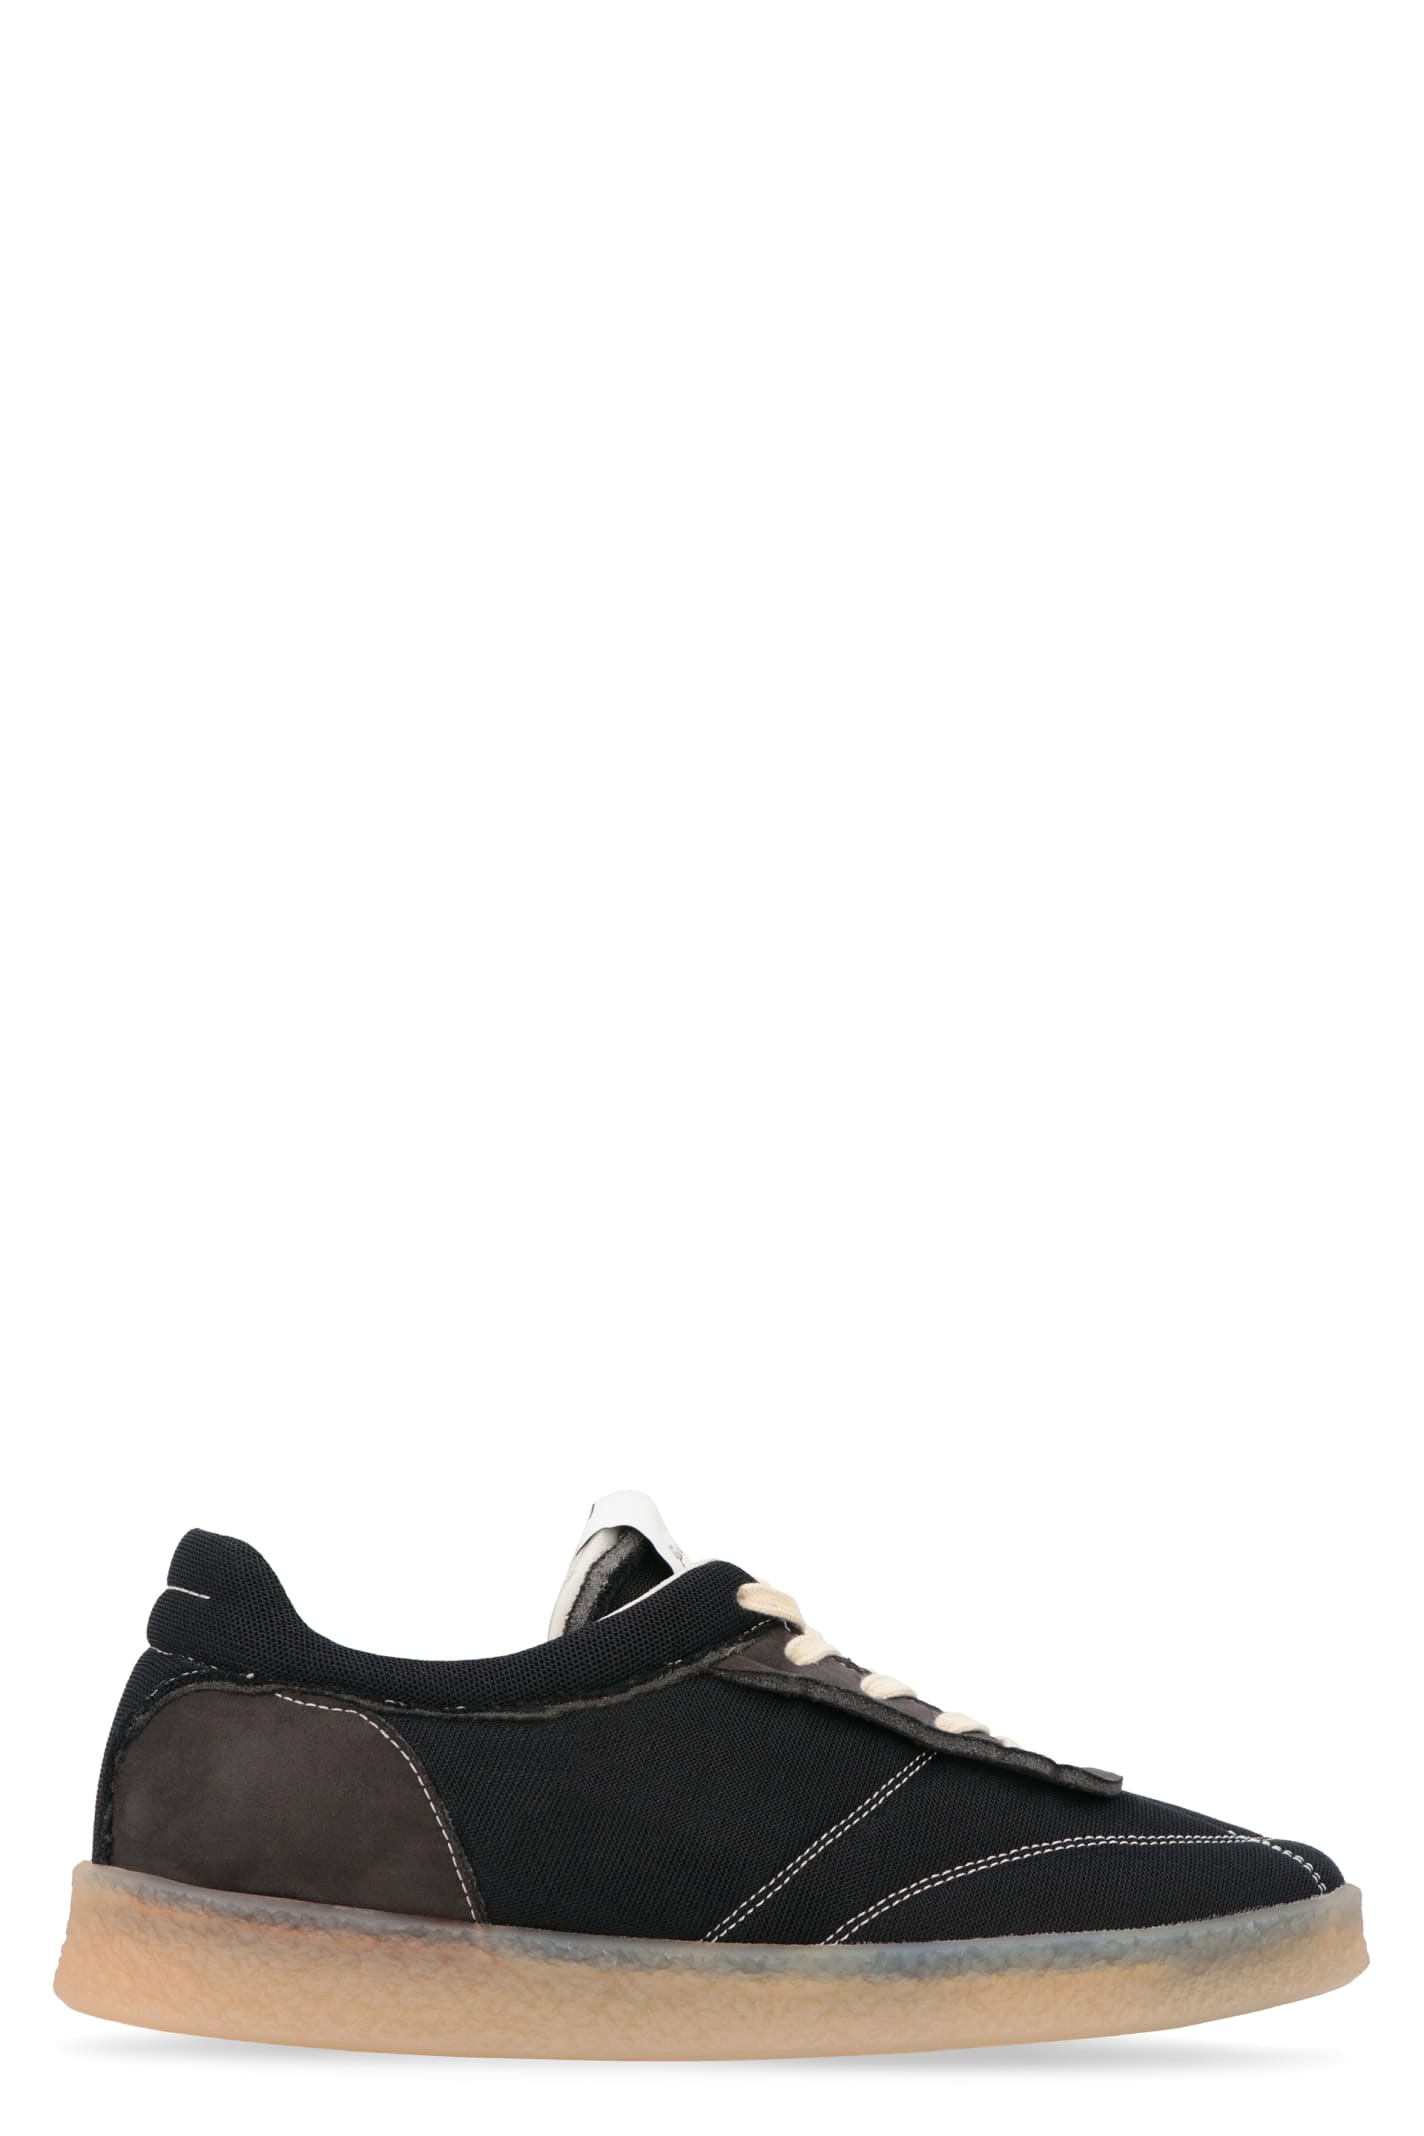 MM6 Maison Margiela Leather And Fabric Low-top Sneakers